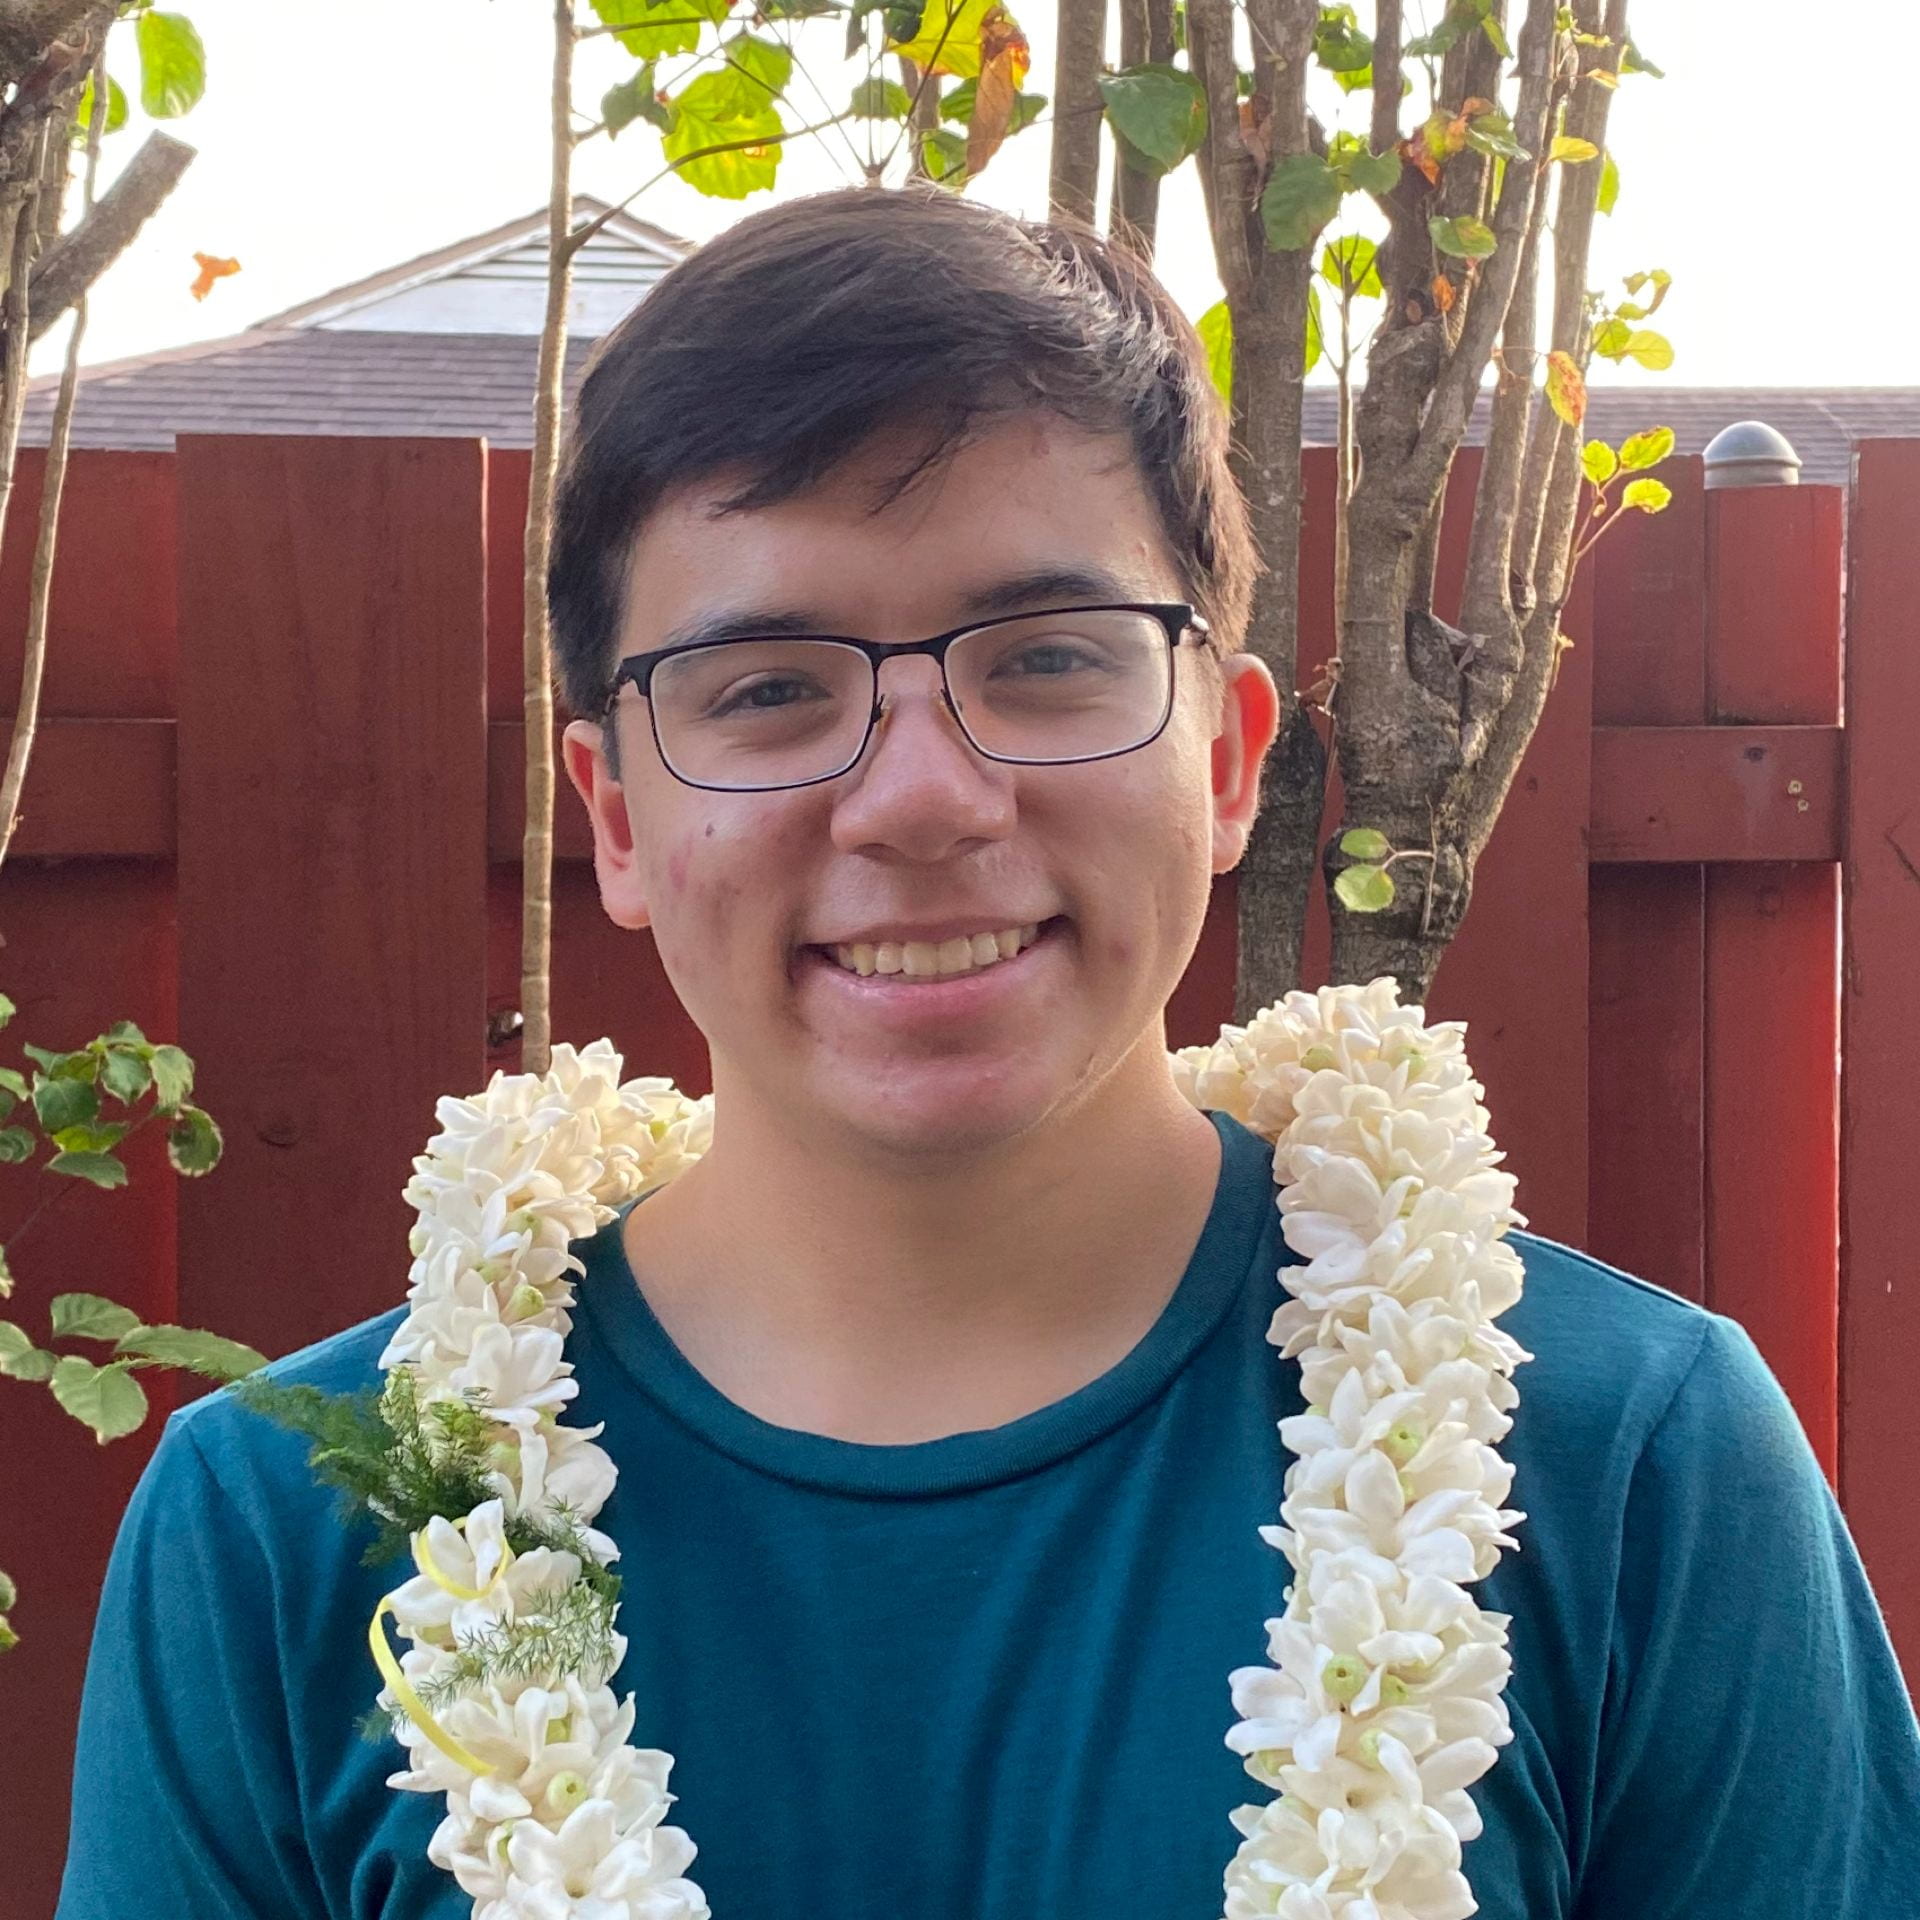 Photo of young man with glasses wearing a traditional Hawaiian lei.